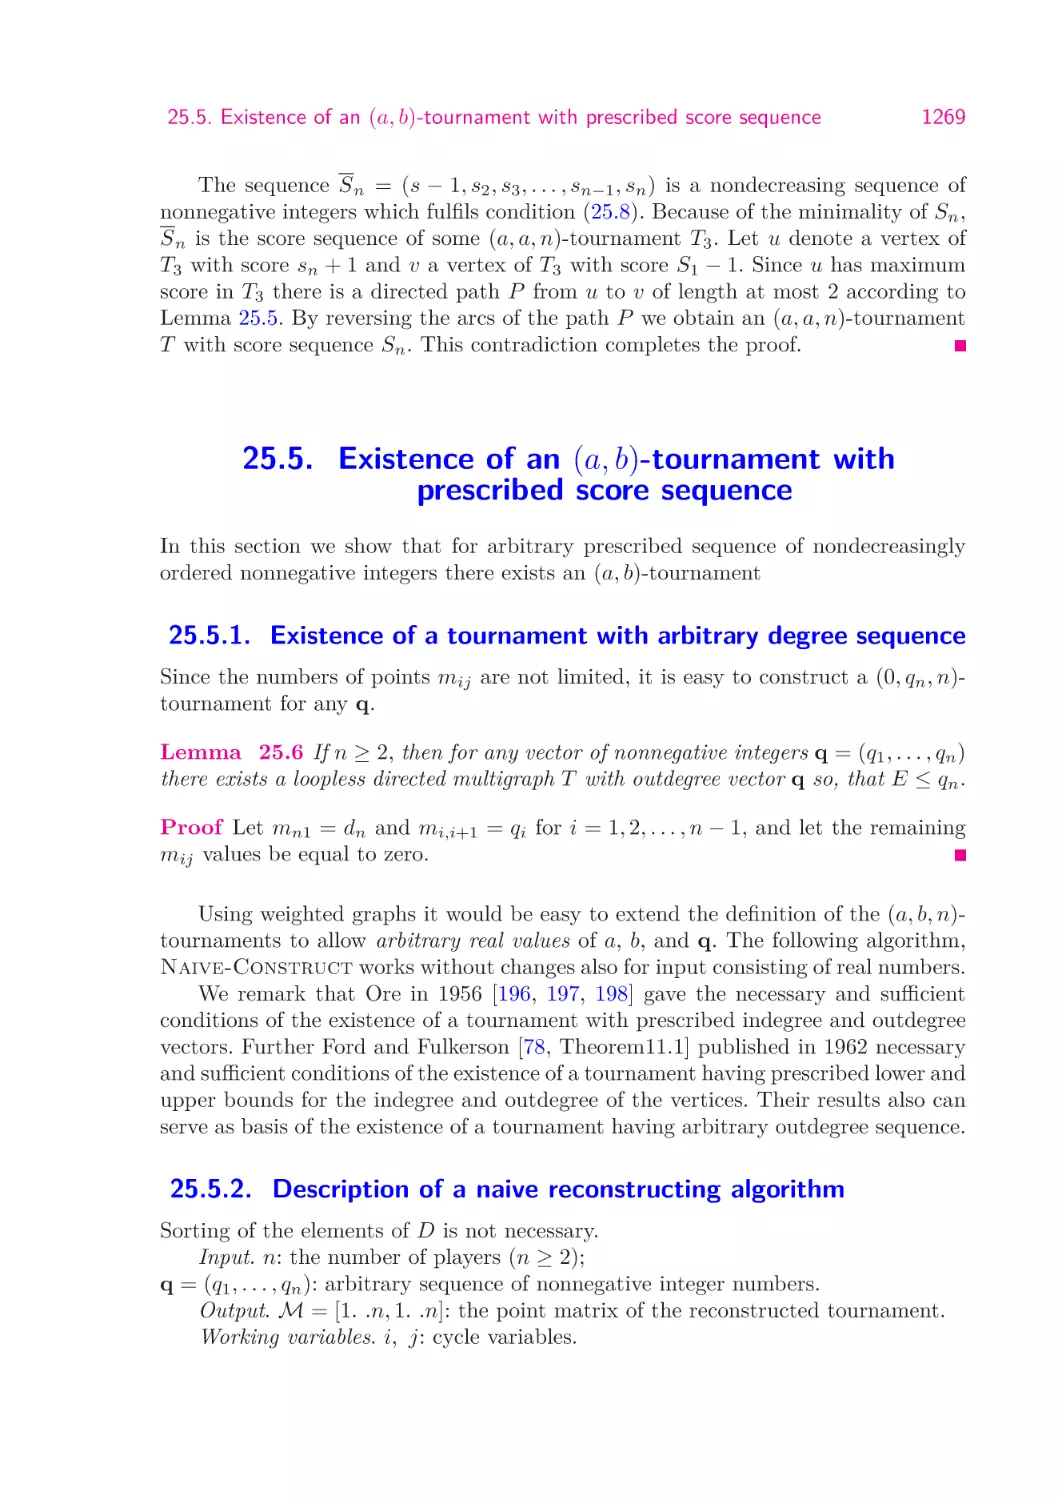 25.5.  Existence of an (a,b)-tournament with prescribed score sequence
25.5.1.  Existence of a tournament with arbitrary degree sequence
25.5.2.  Description of a naive reconstructing algorithm